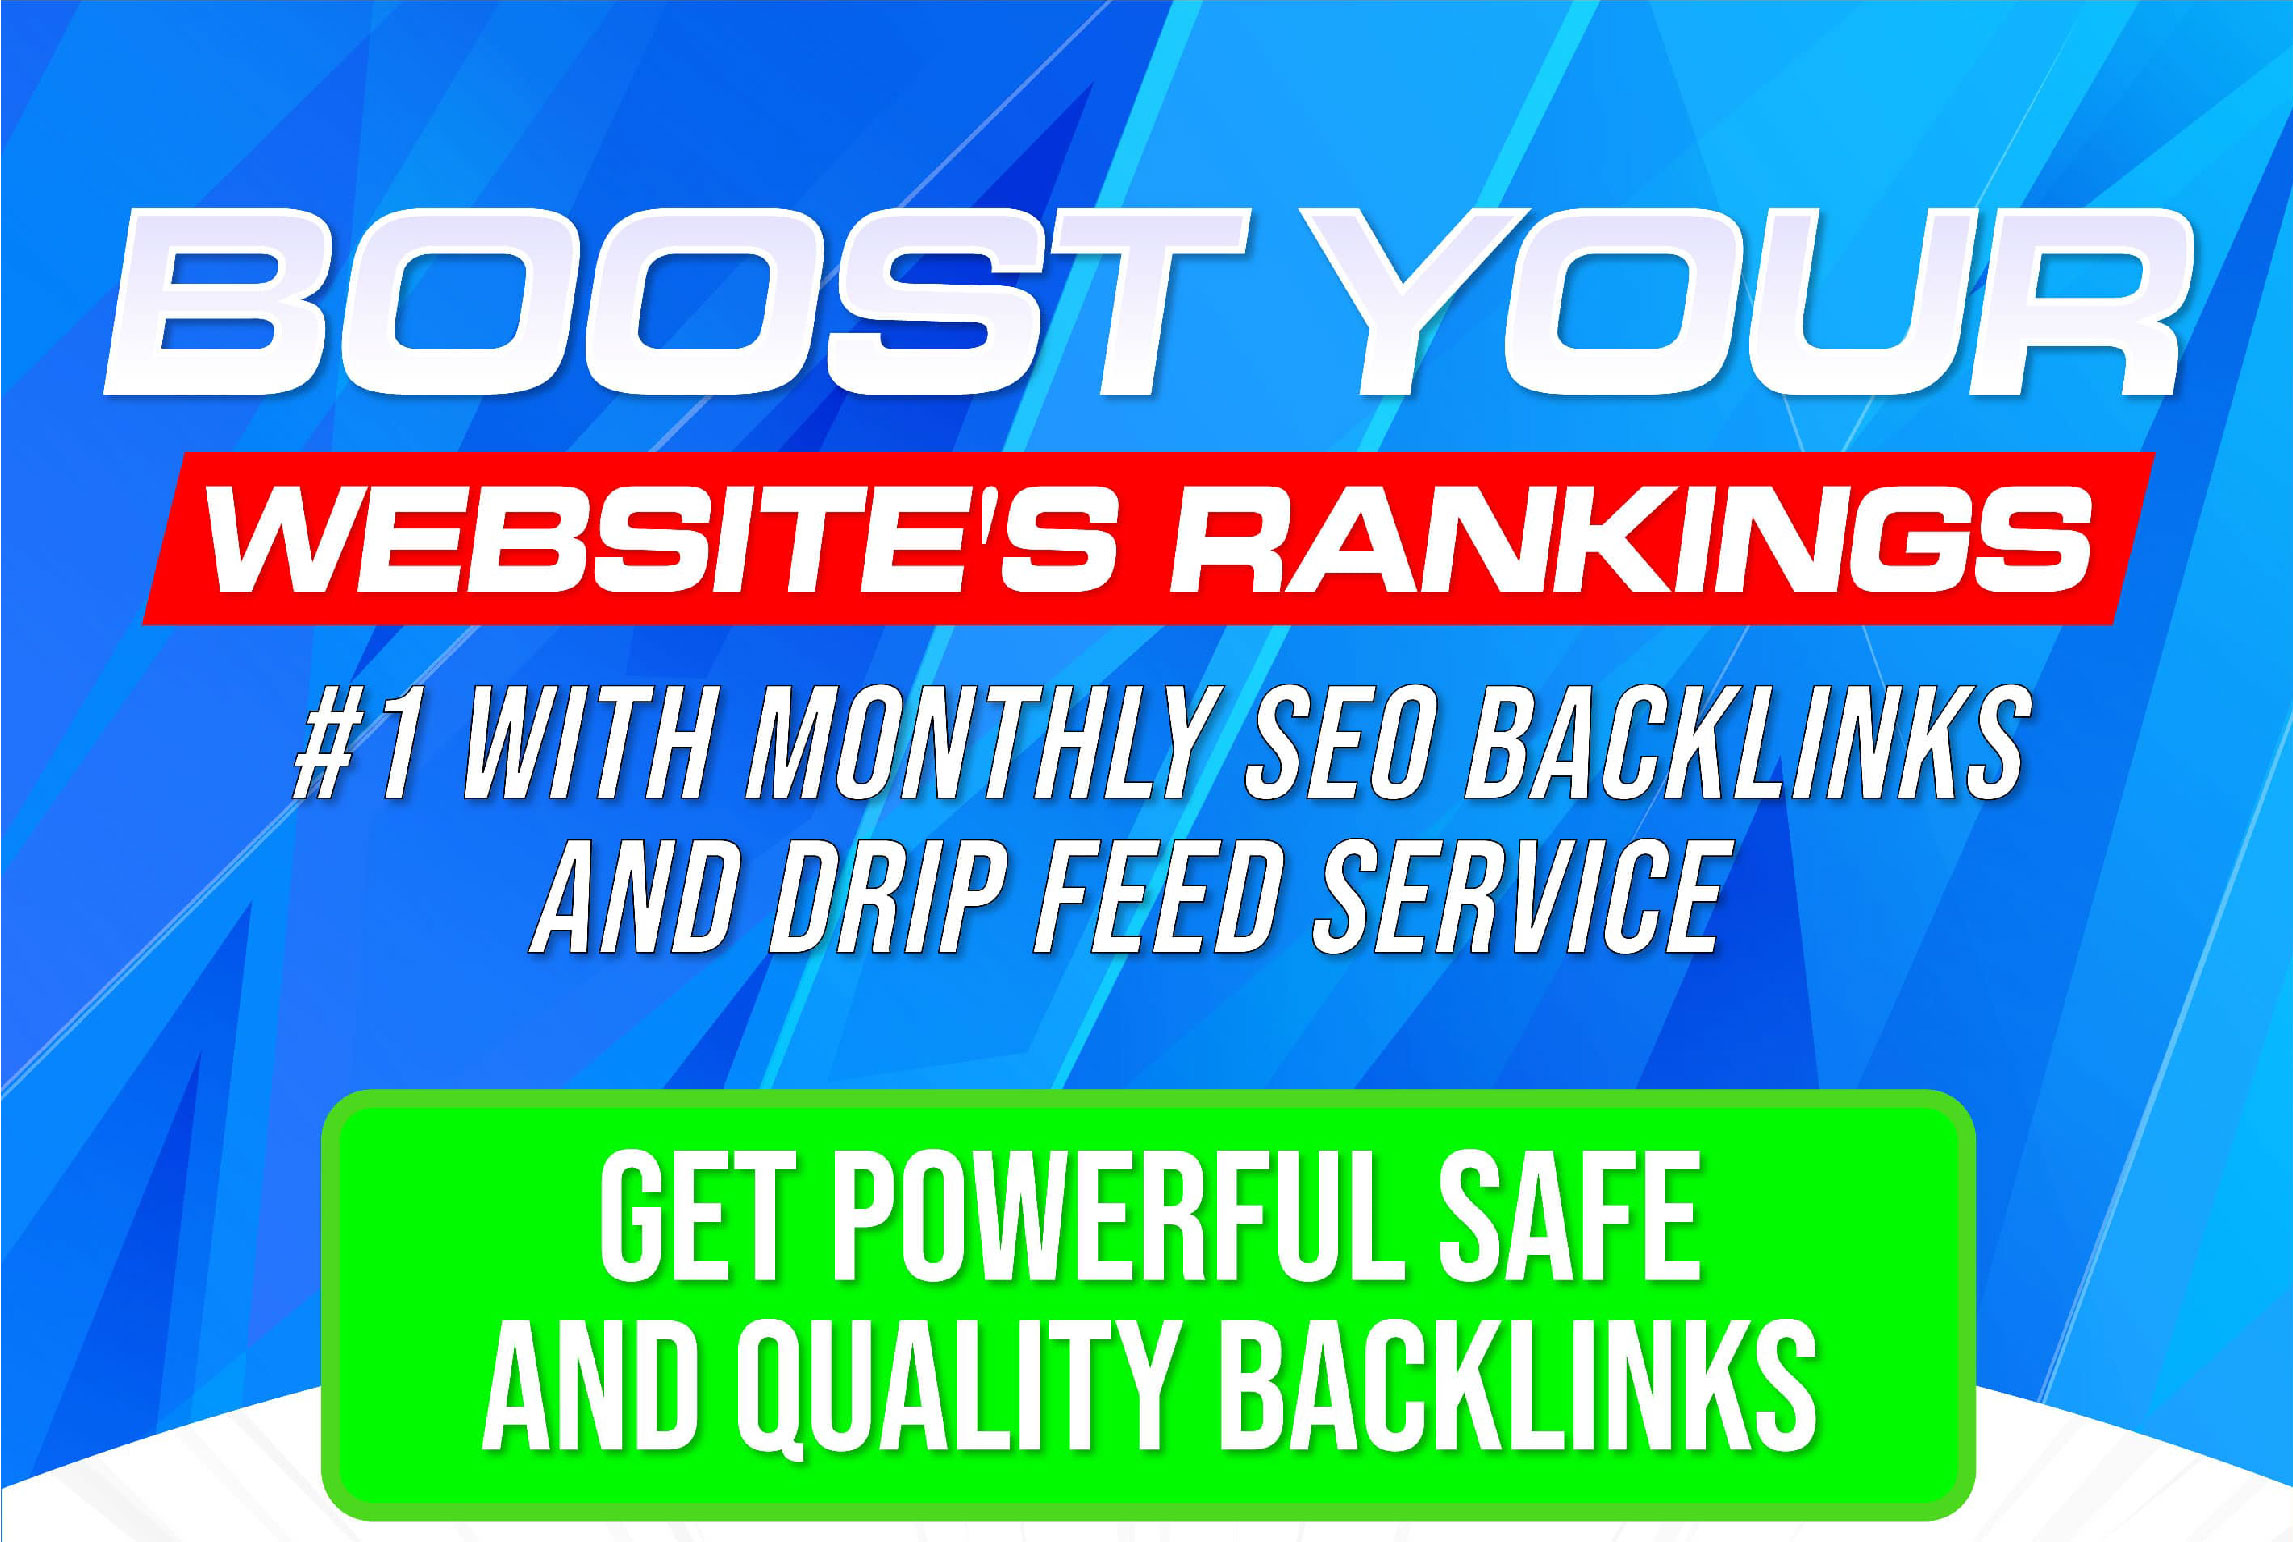 Boost Your Website's Rankings #1 with Monthly SEO Backlinks and Drip Feed Service"